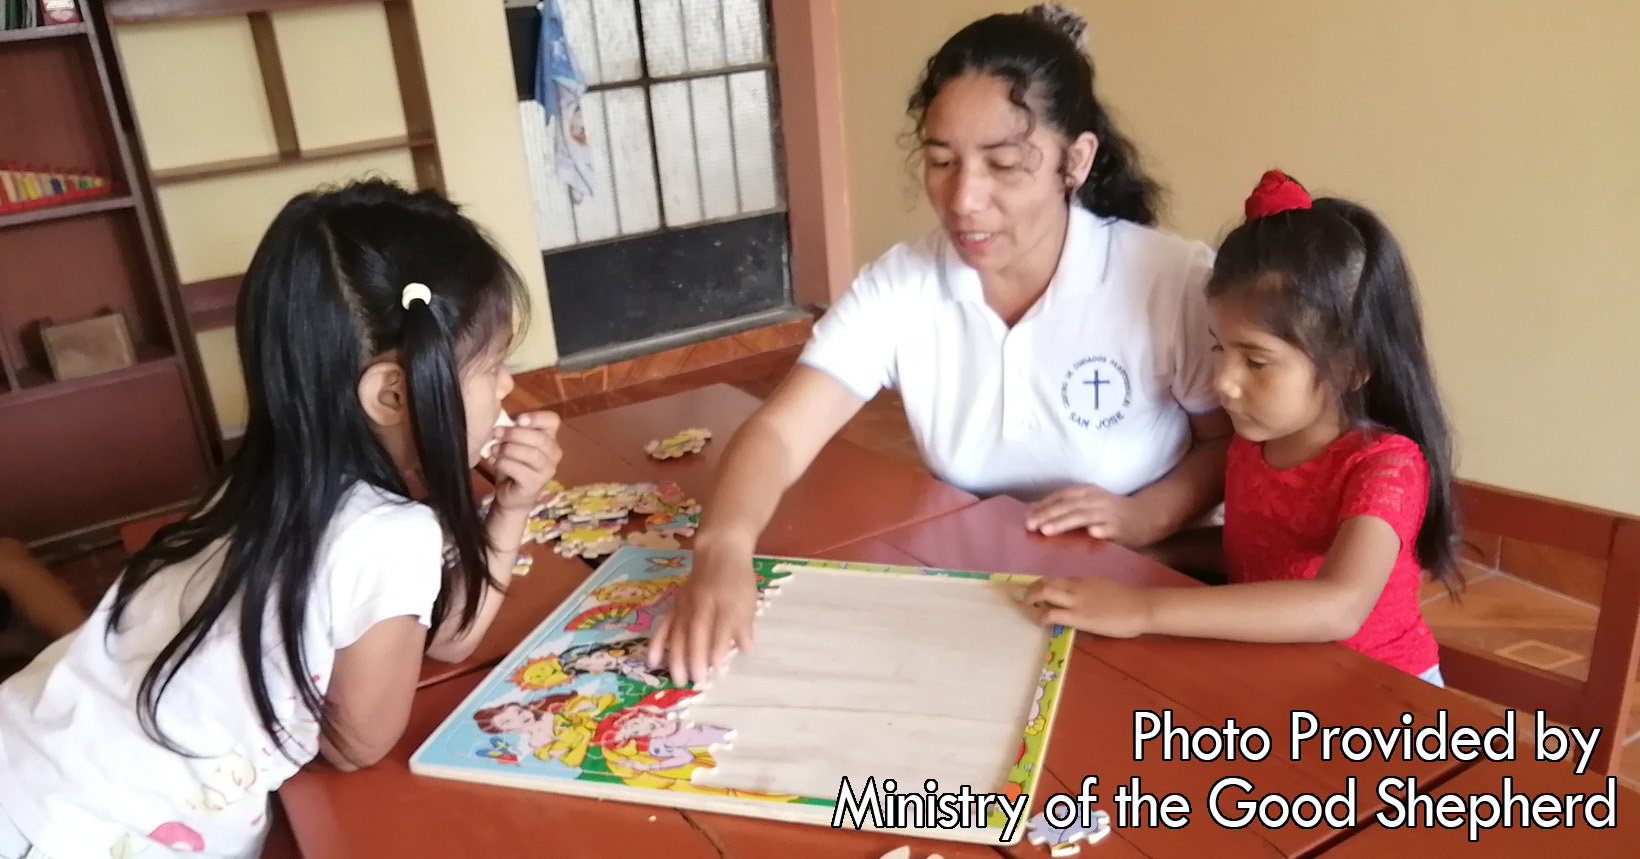 One of the sisters is helping two young girls solve a puzzle. The two girls are learning how to put things together which will help them further in life.